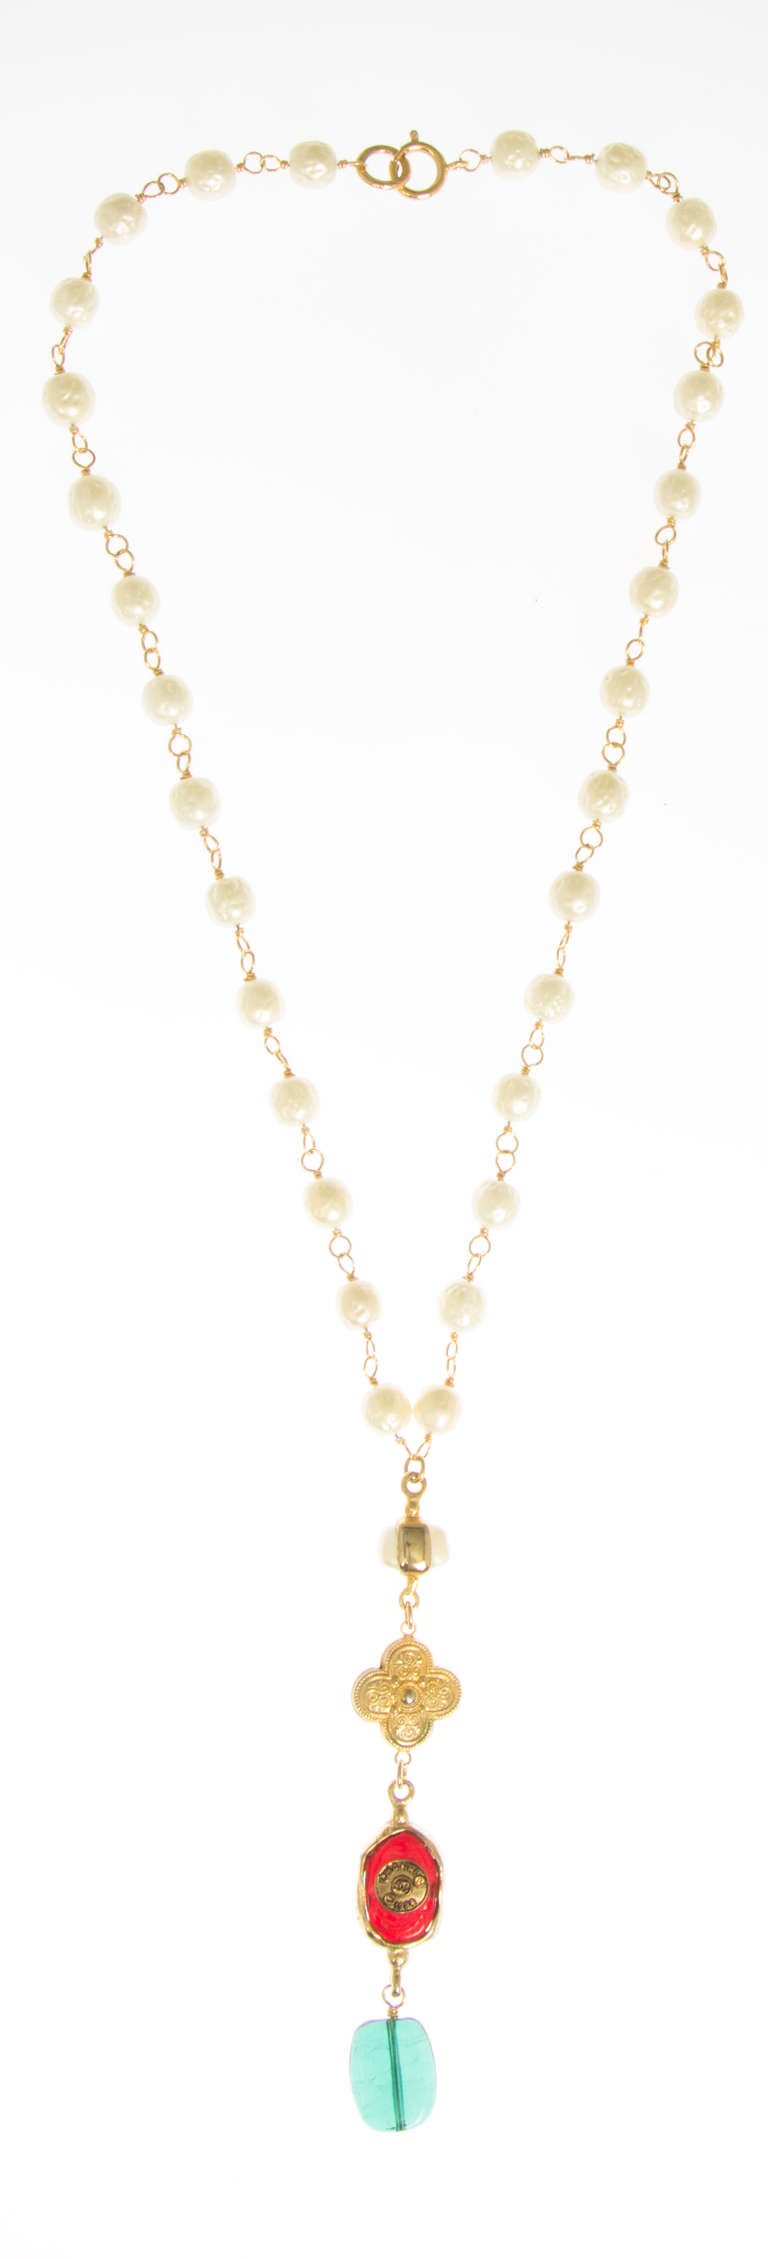 This is a beautiful necklace.great worn by itself or layered with other fabulous CHANEL pieces!  The necklace itself is 25